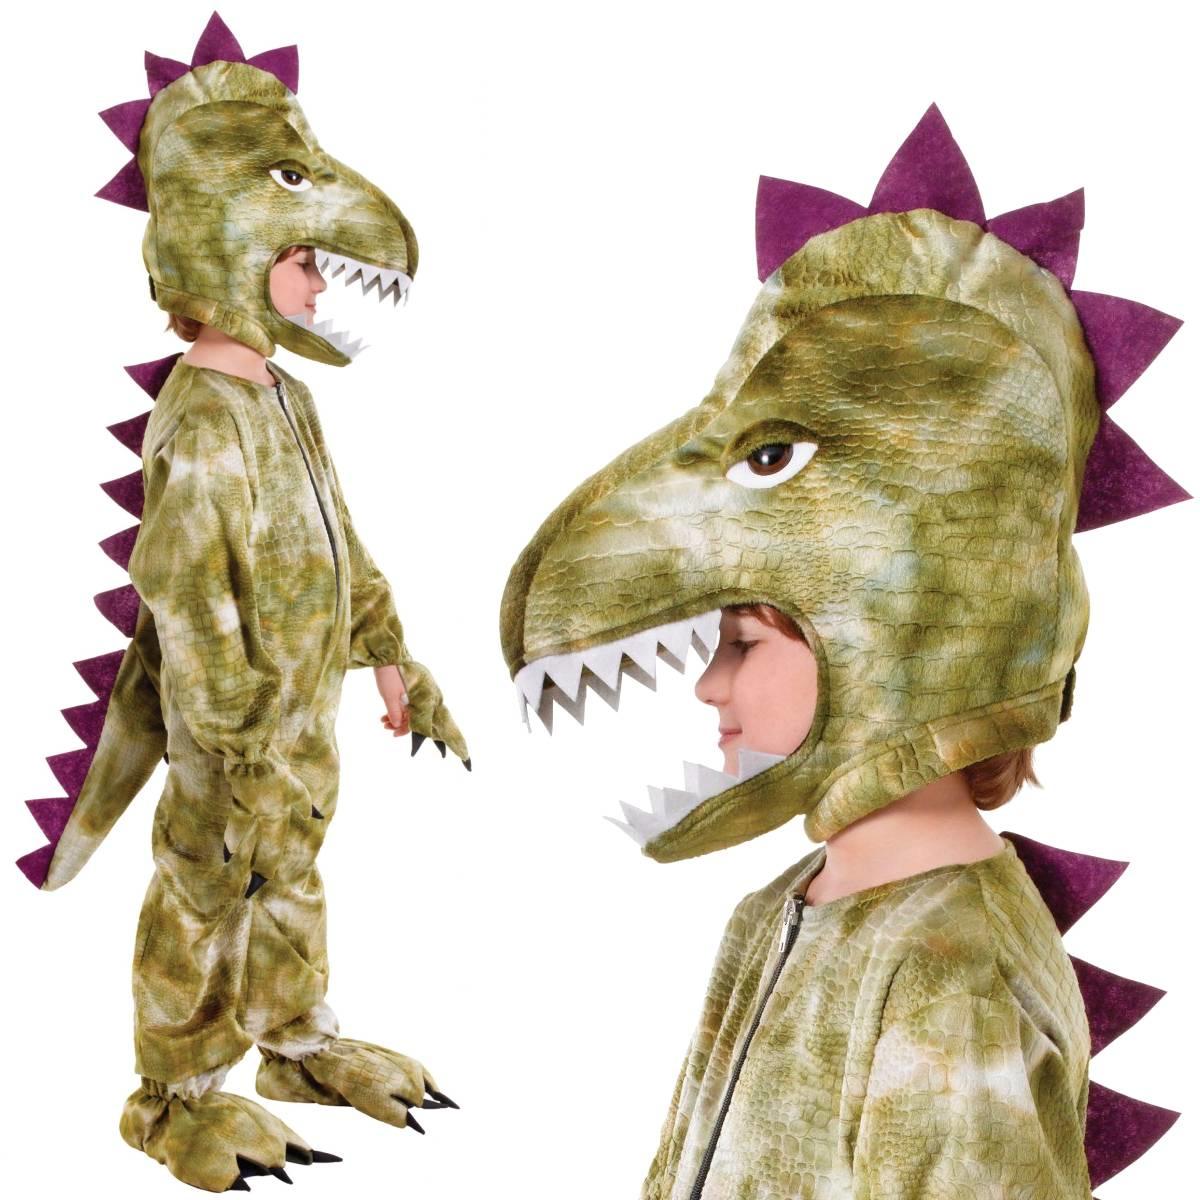 Jurassic Dinosaur Fancy Dress Costume for Children by Bristol Novelties CC275 available here at Karnival Costumes online party shop